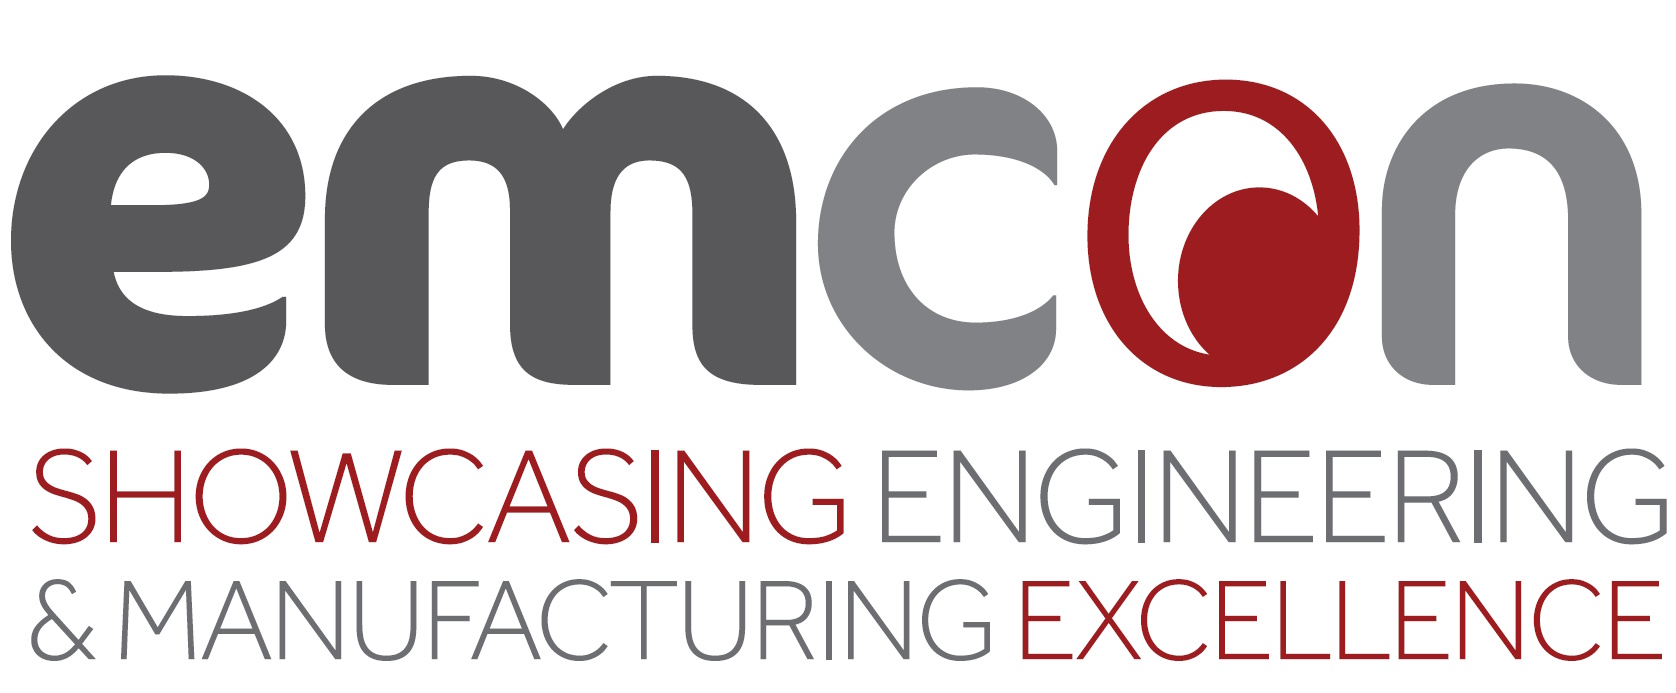 Forging an Engineering & Manufacturing Community in North East England